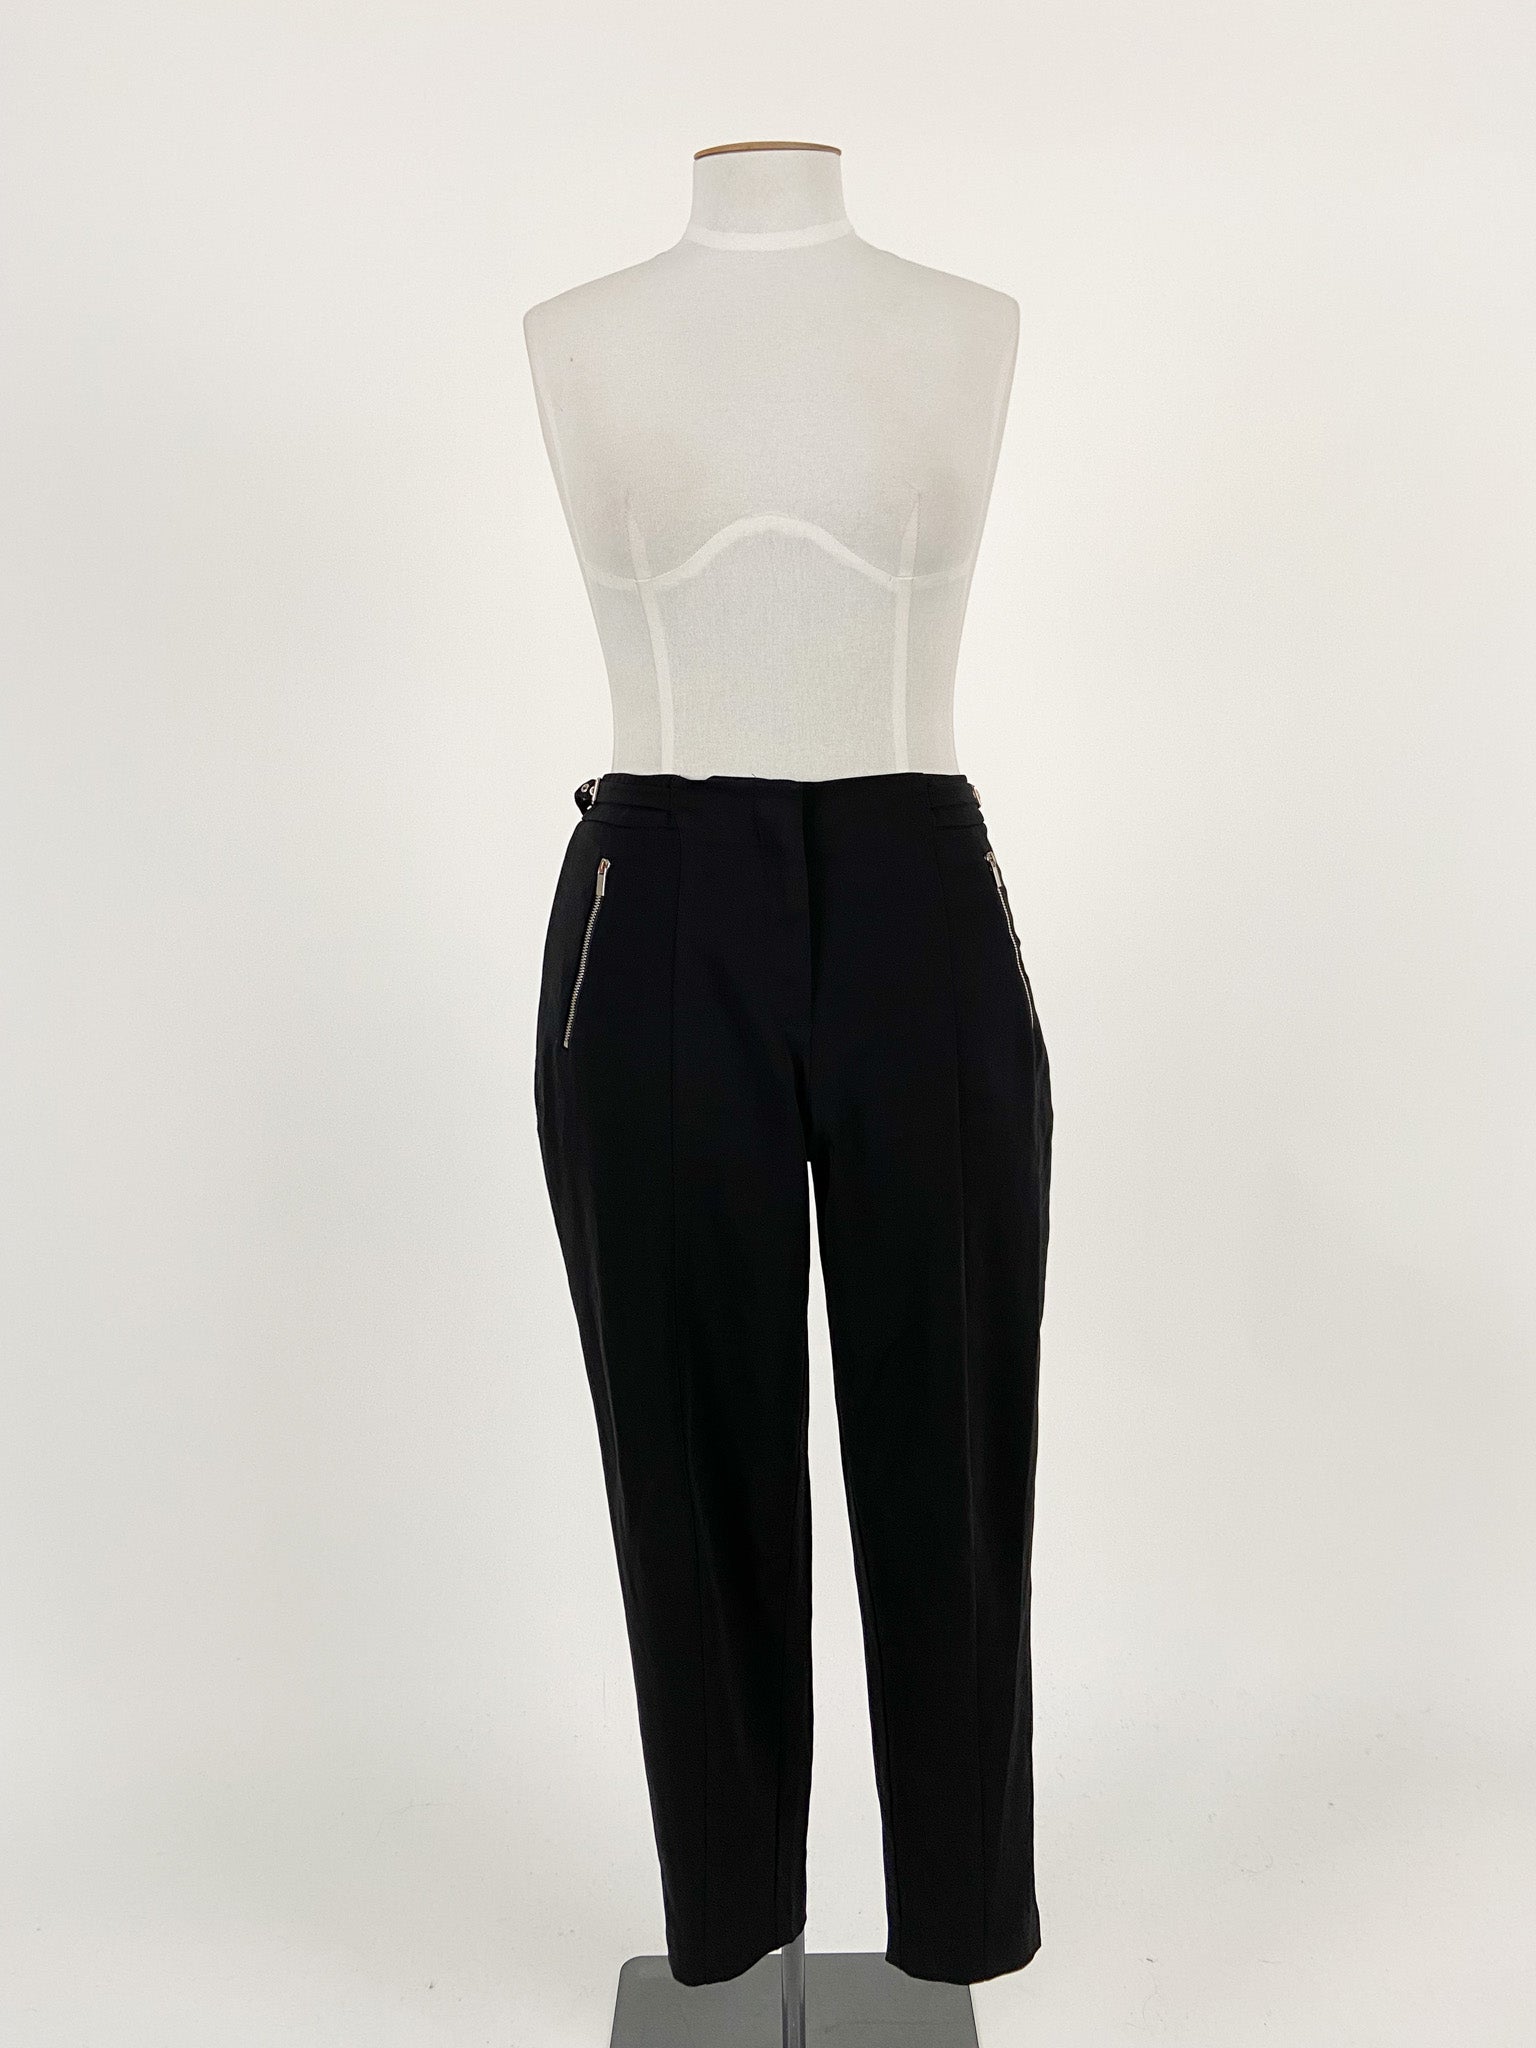 Shop for Size 10, Cropped Trousers, Trousers & Shorts